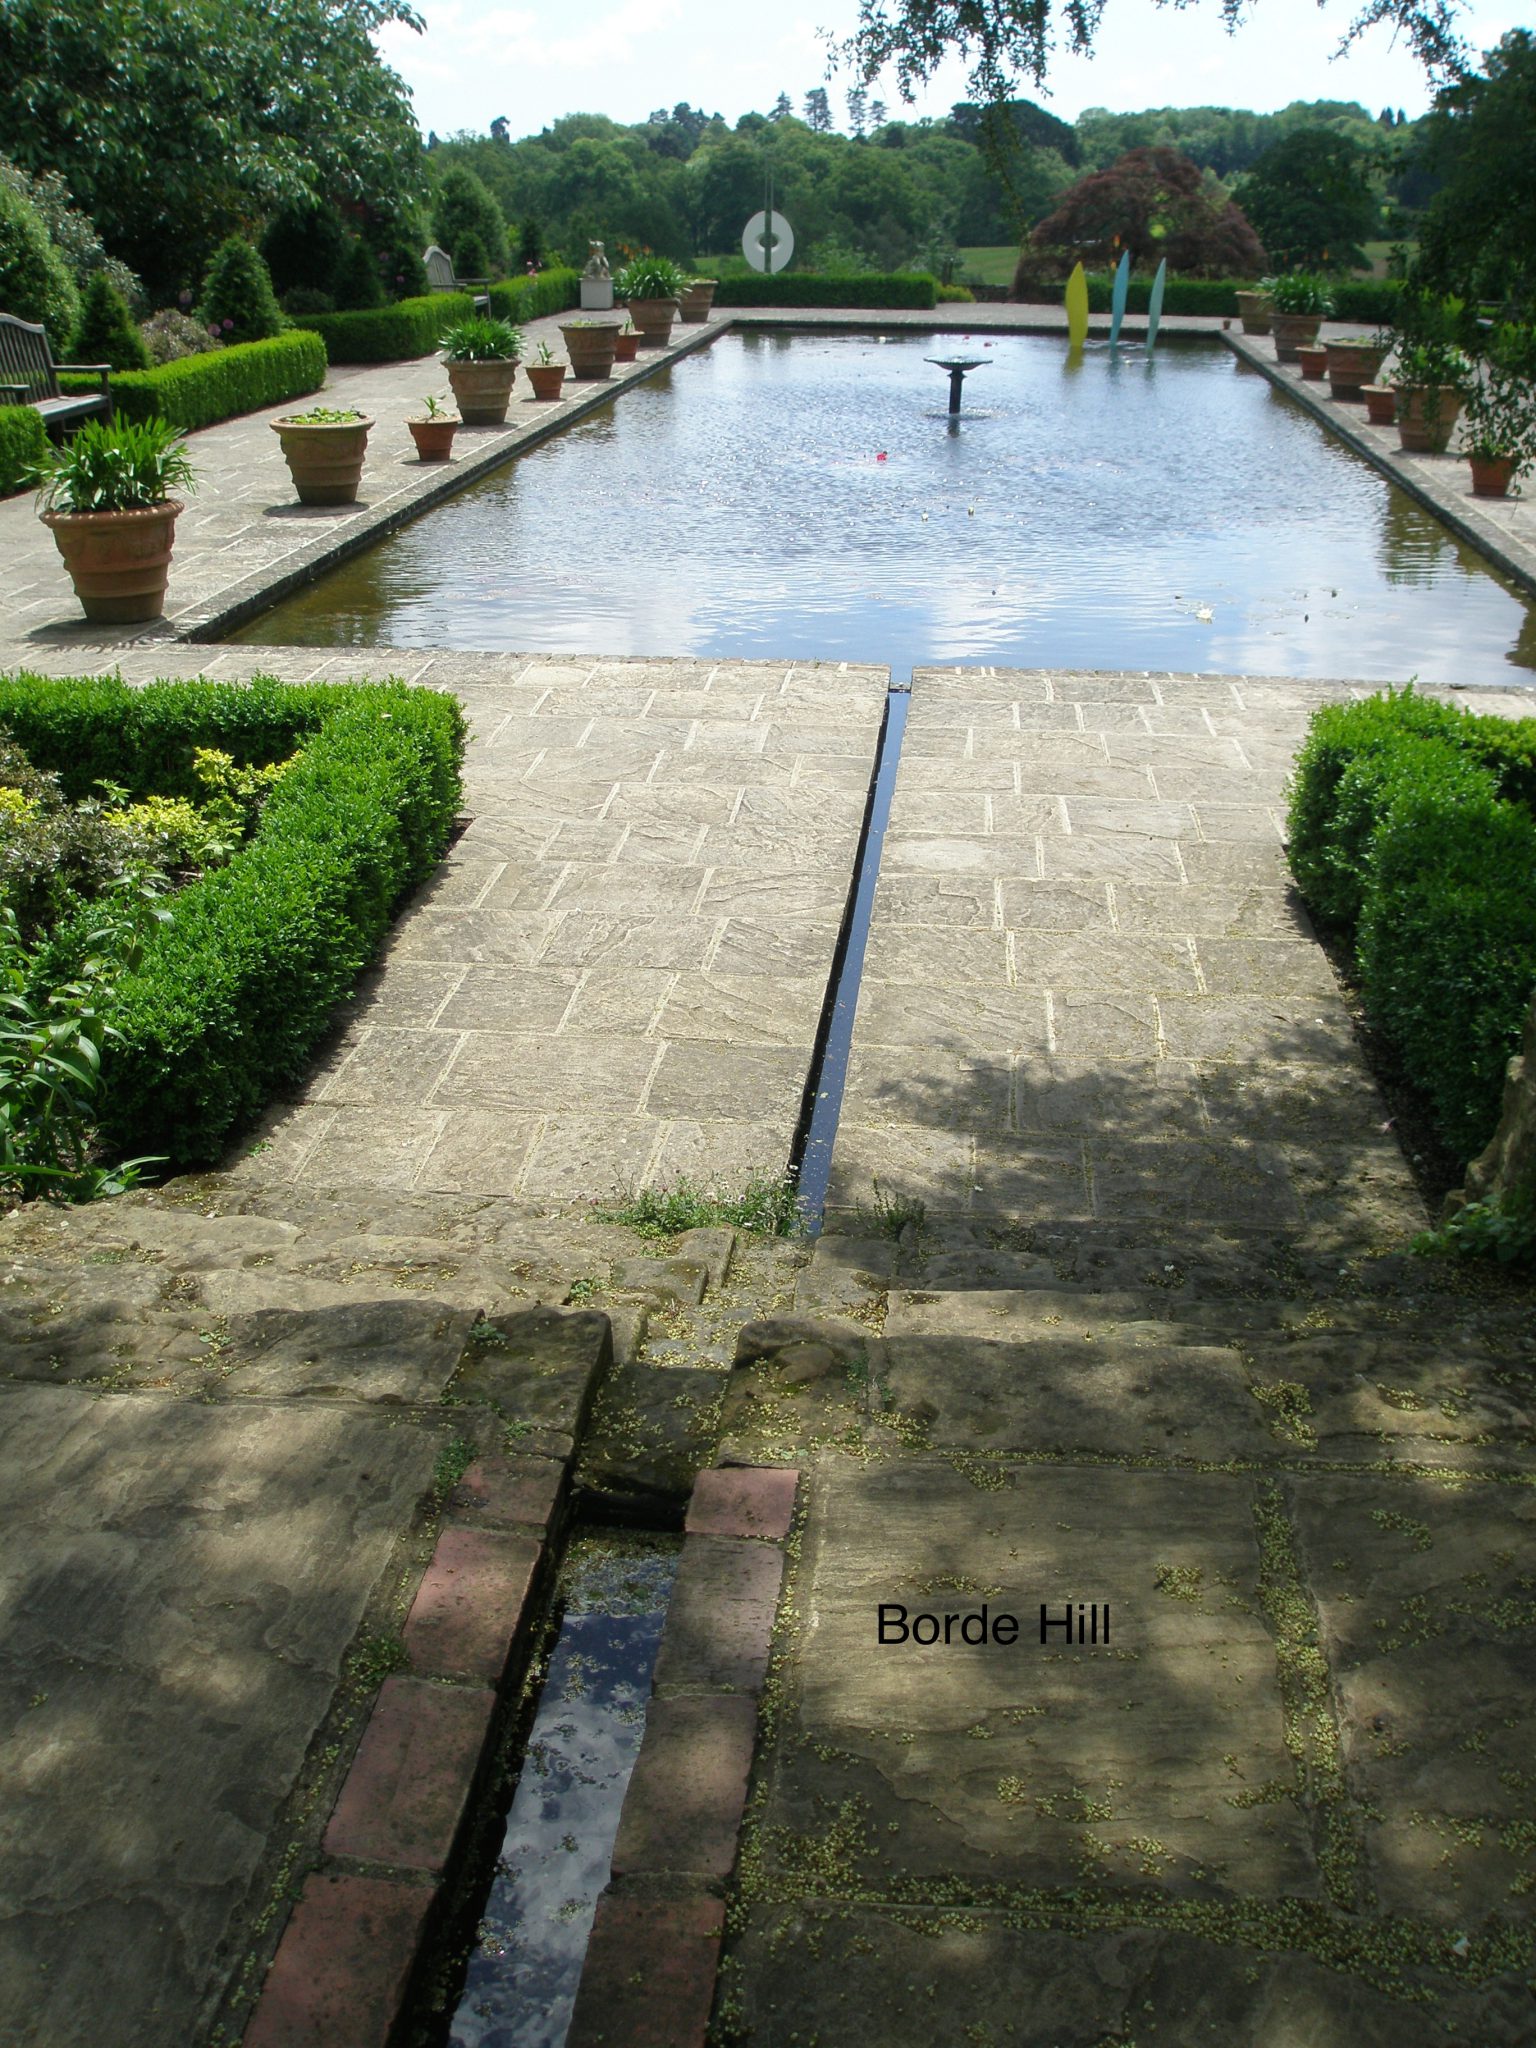 A Rill feeds the Pool, in the Italian Garden